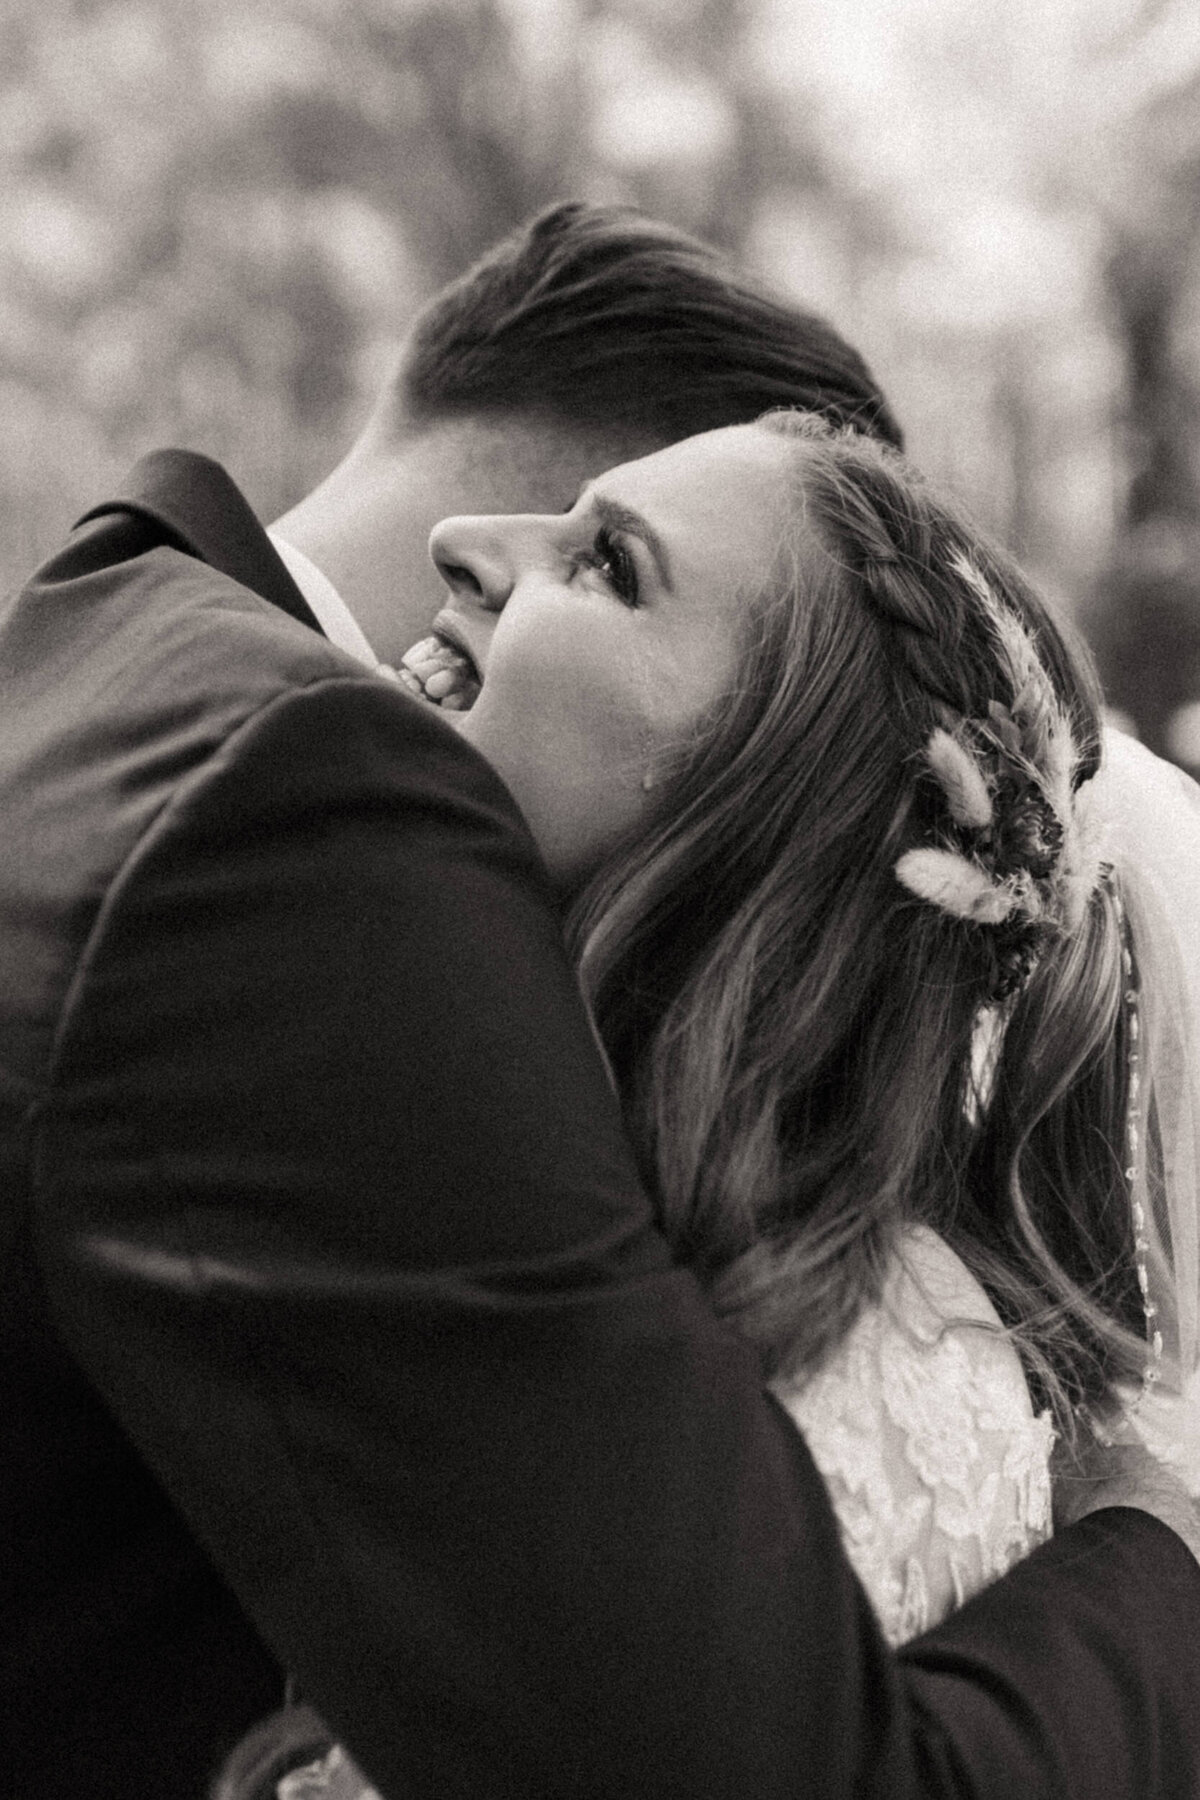 Emotional bride has a tear running down her cheek as she smiles and embraces a hug from her groom during their first look